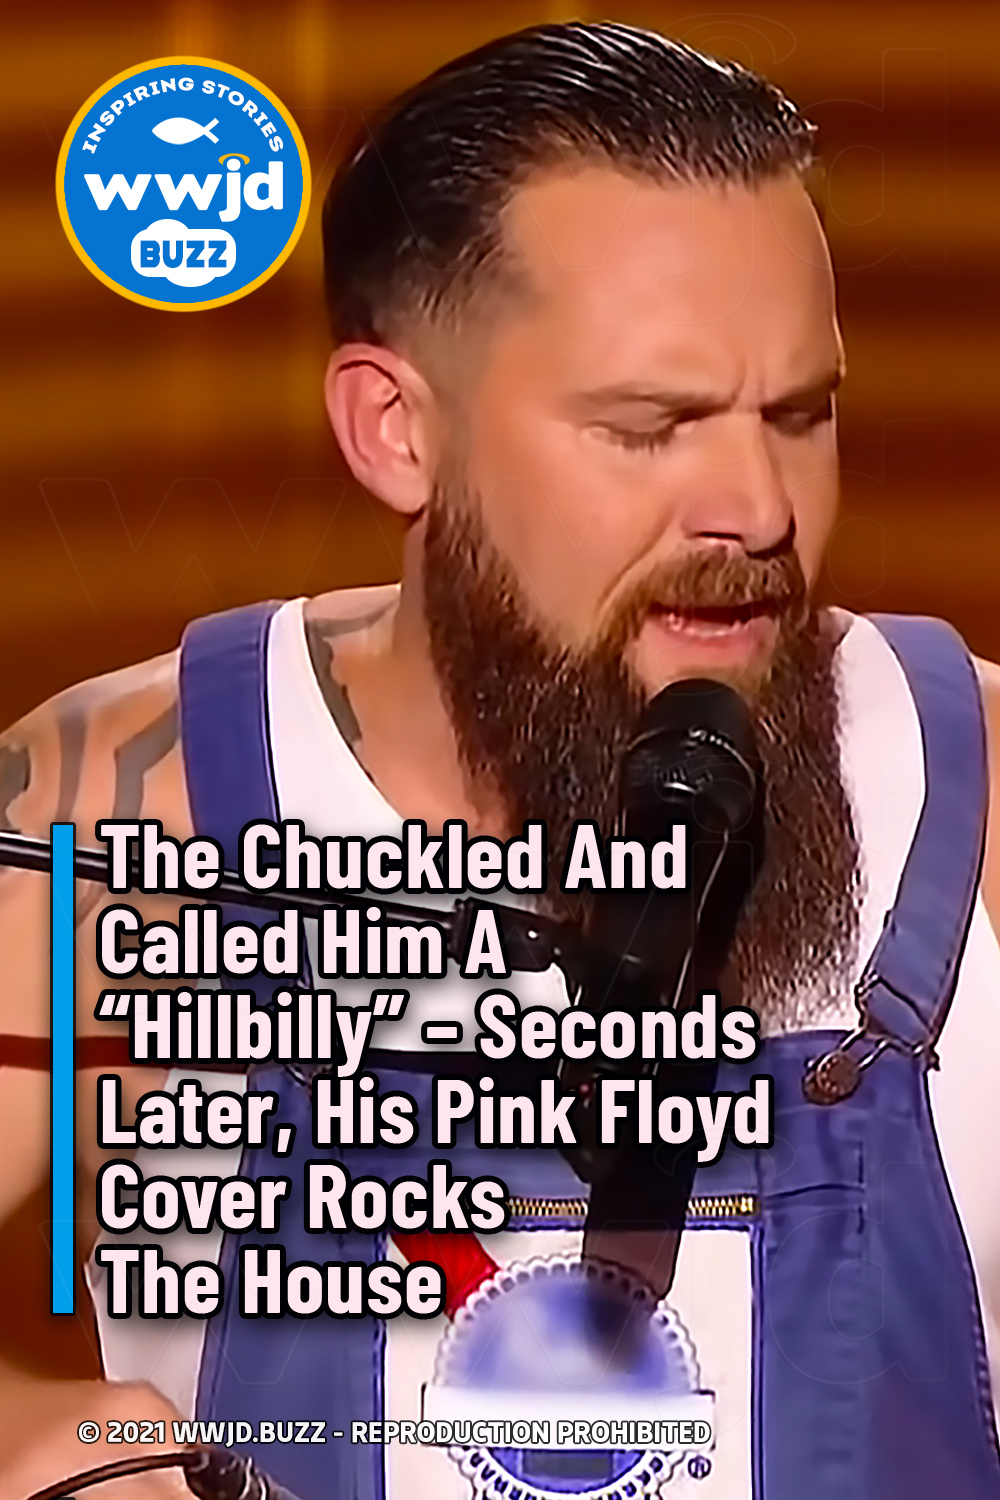 They Chuckled And Called Him A “Hillbilly” – Seconds Later, His Pink Floyd Cover Rocks The House